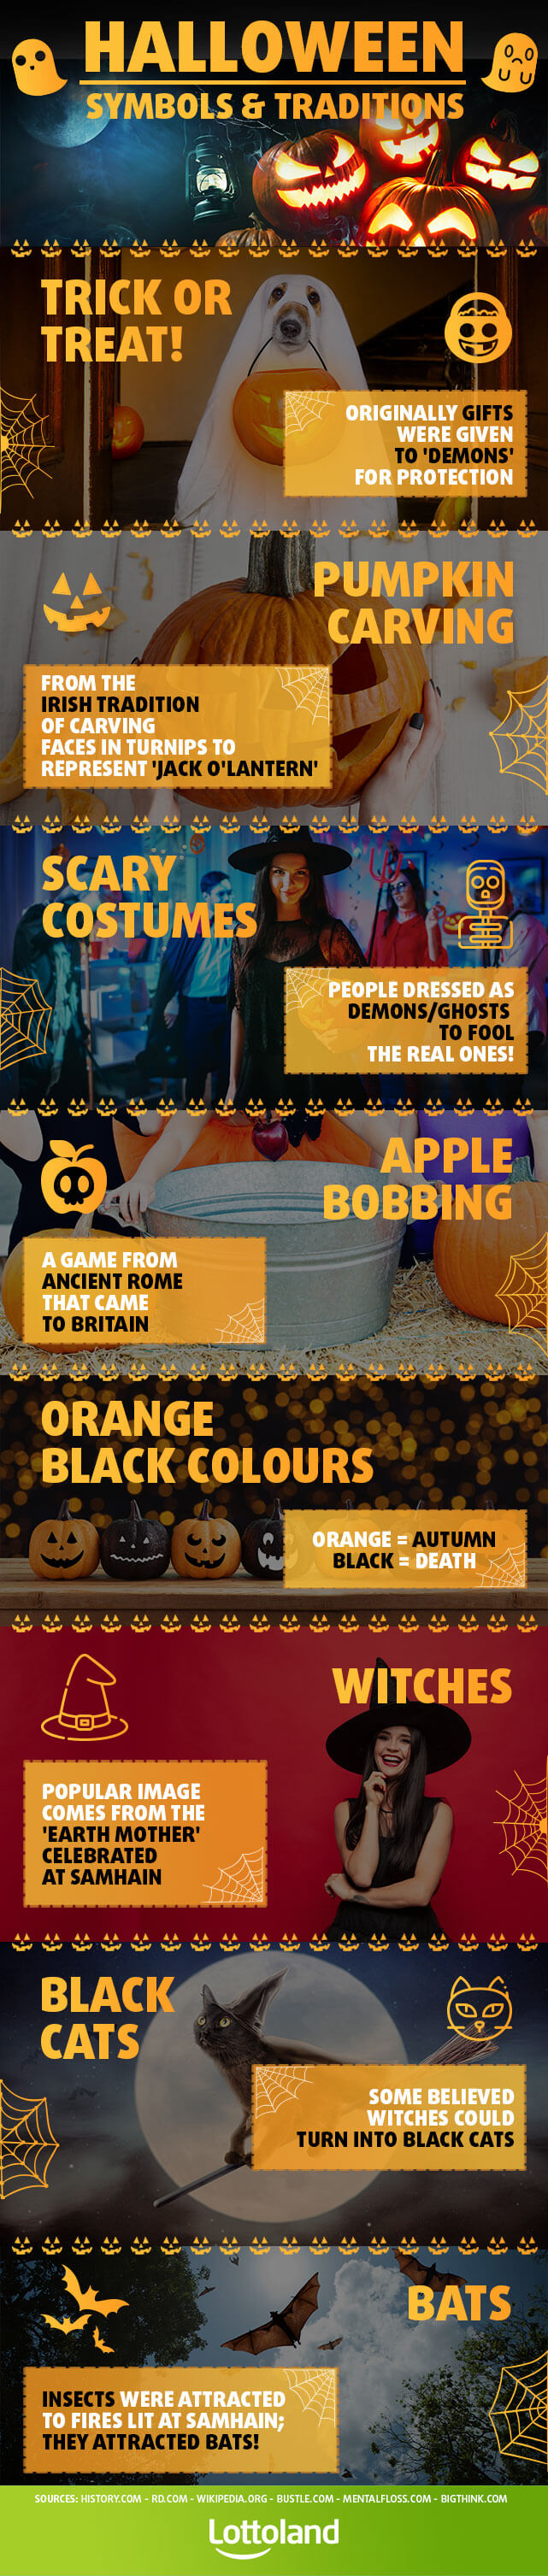 Myths, legends and traditions of Halloween